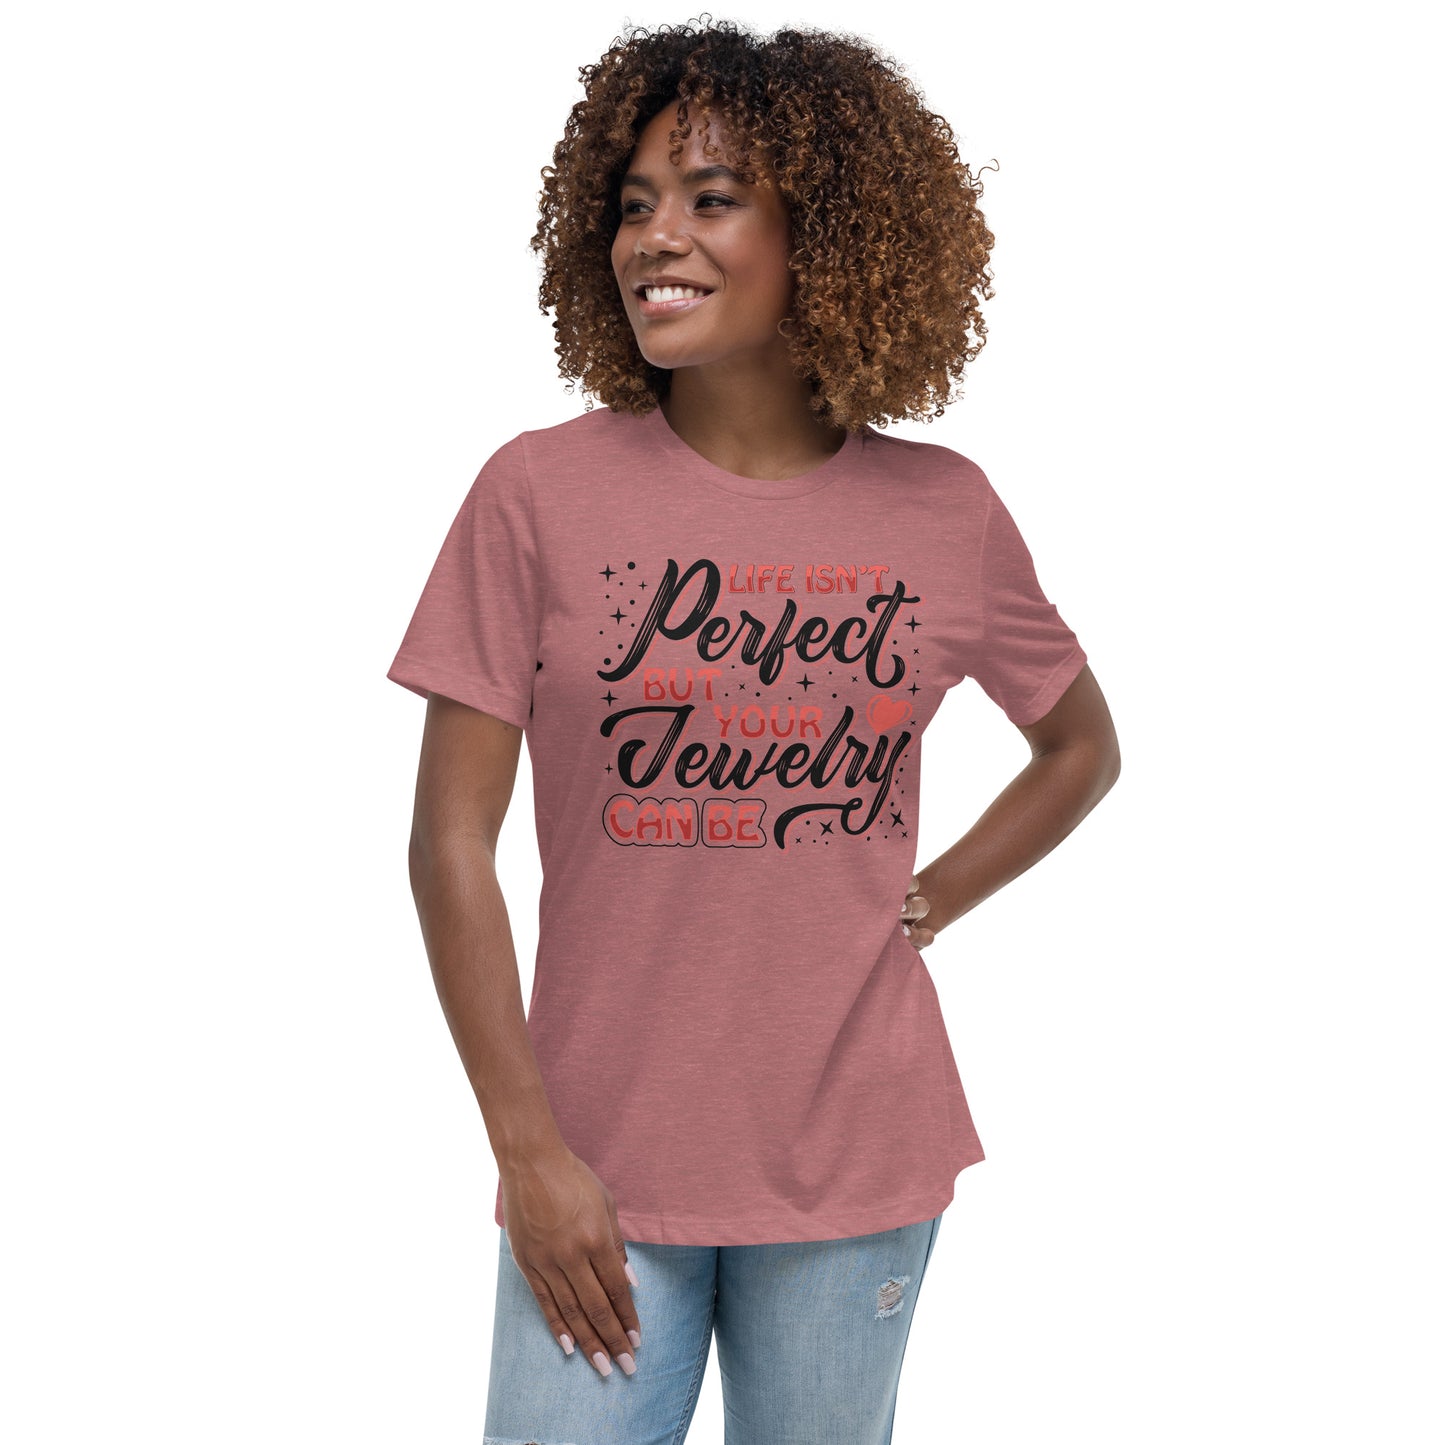 "Life Isn't Perfect But Your Jewelry Can Be" Quote Relaxed T-Shirt